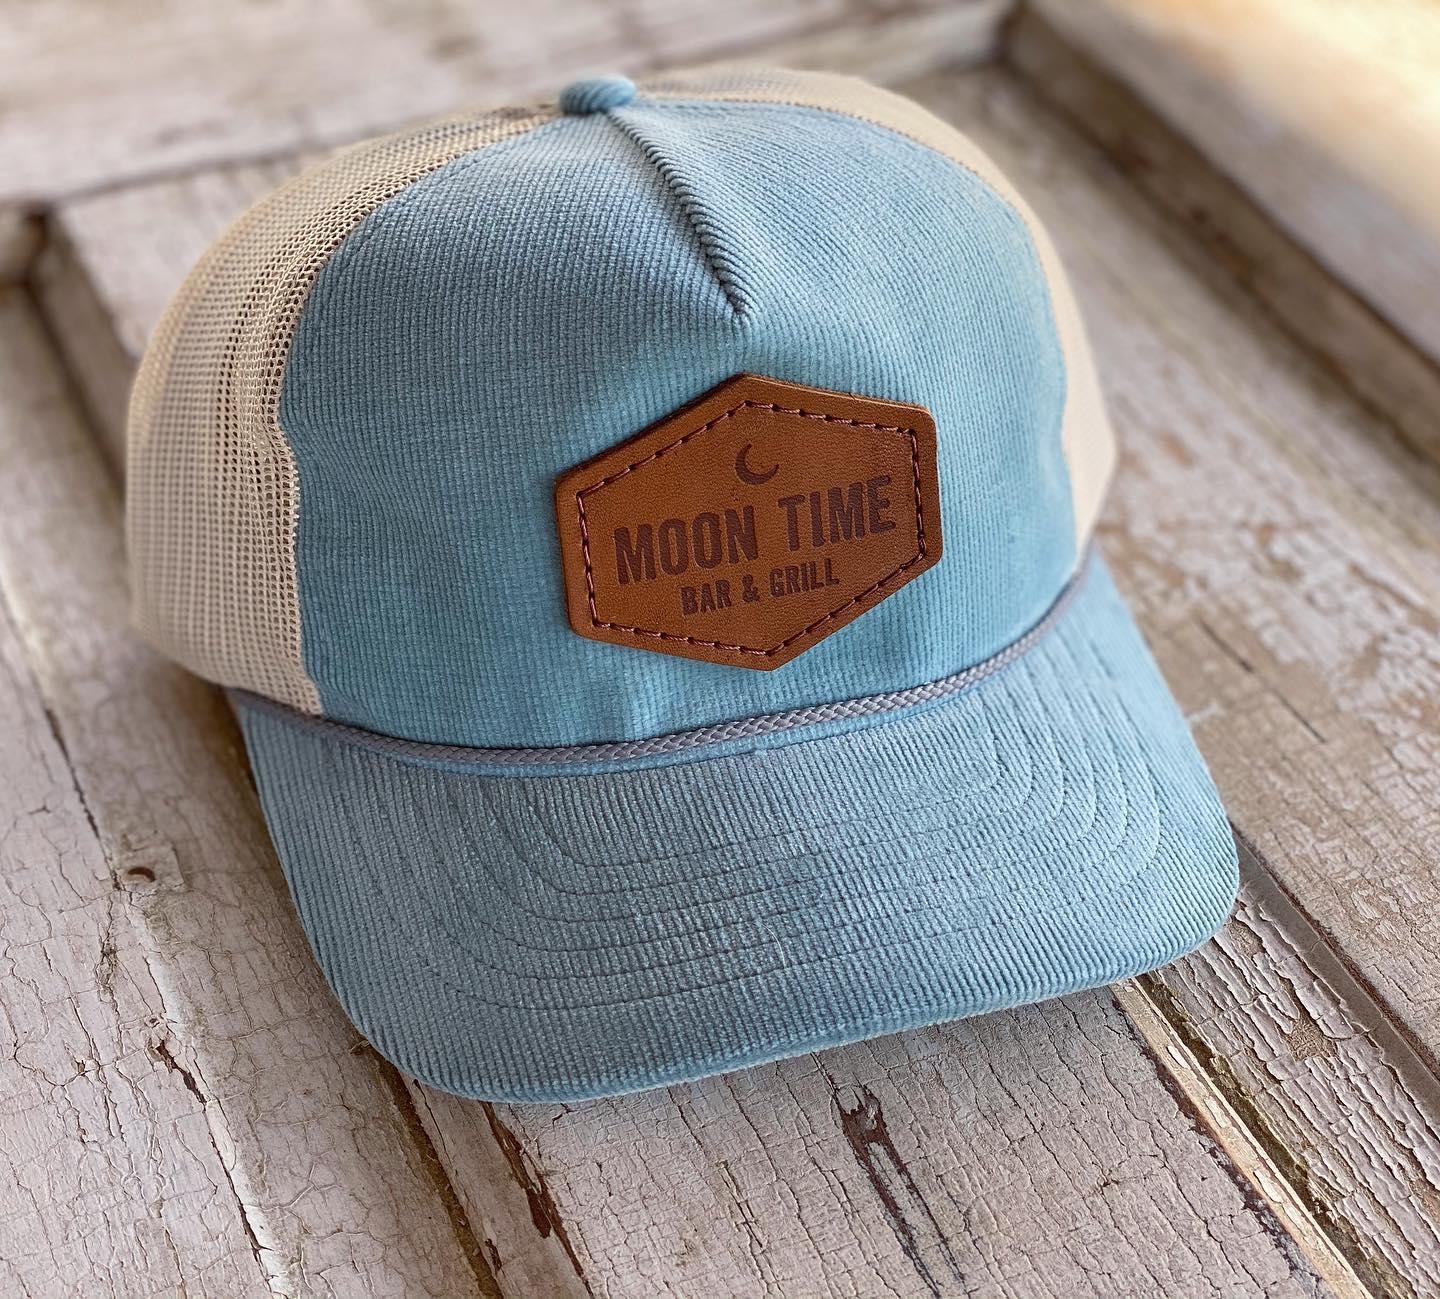 Moon Time Bar & Grill Leather Patch Corduroy Trucker Hats 